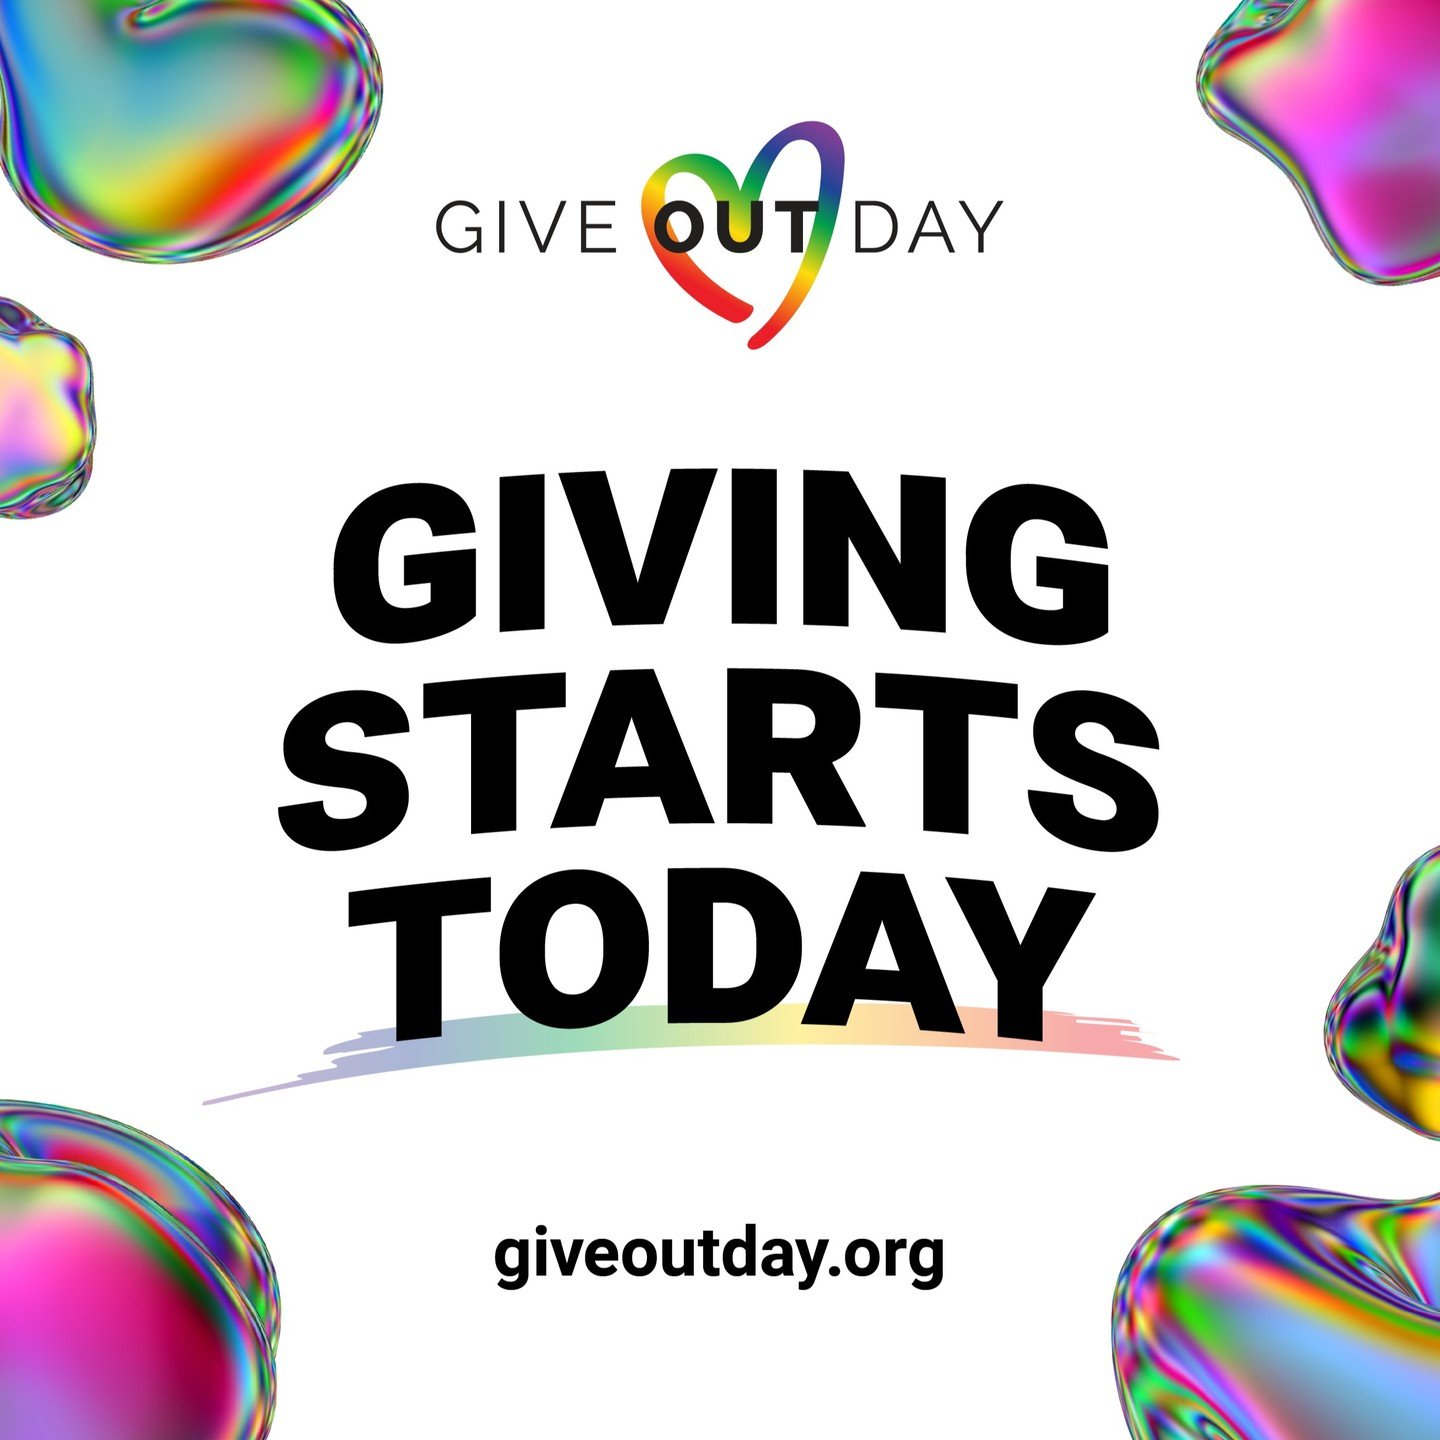 This Give OUT Day, Diversity Richmond is trying to raise $25,000 for 25 years and to help build our emergency financial assistance support hub. As a #GiveOUTDay partner, we have the opportunity to win thousands in additional prize money if we have th